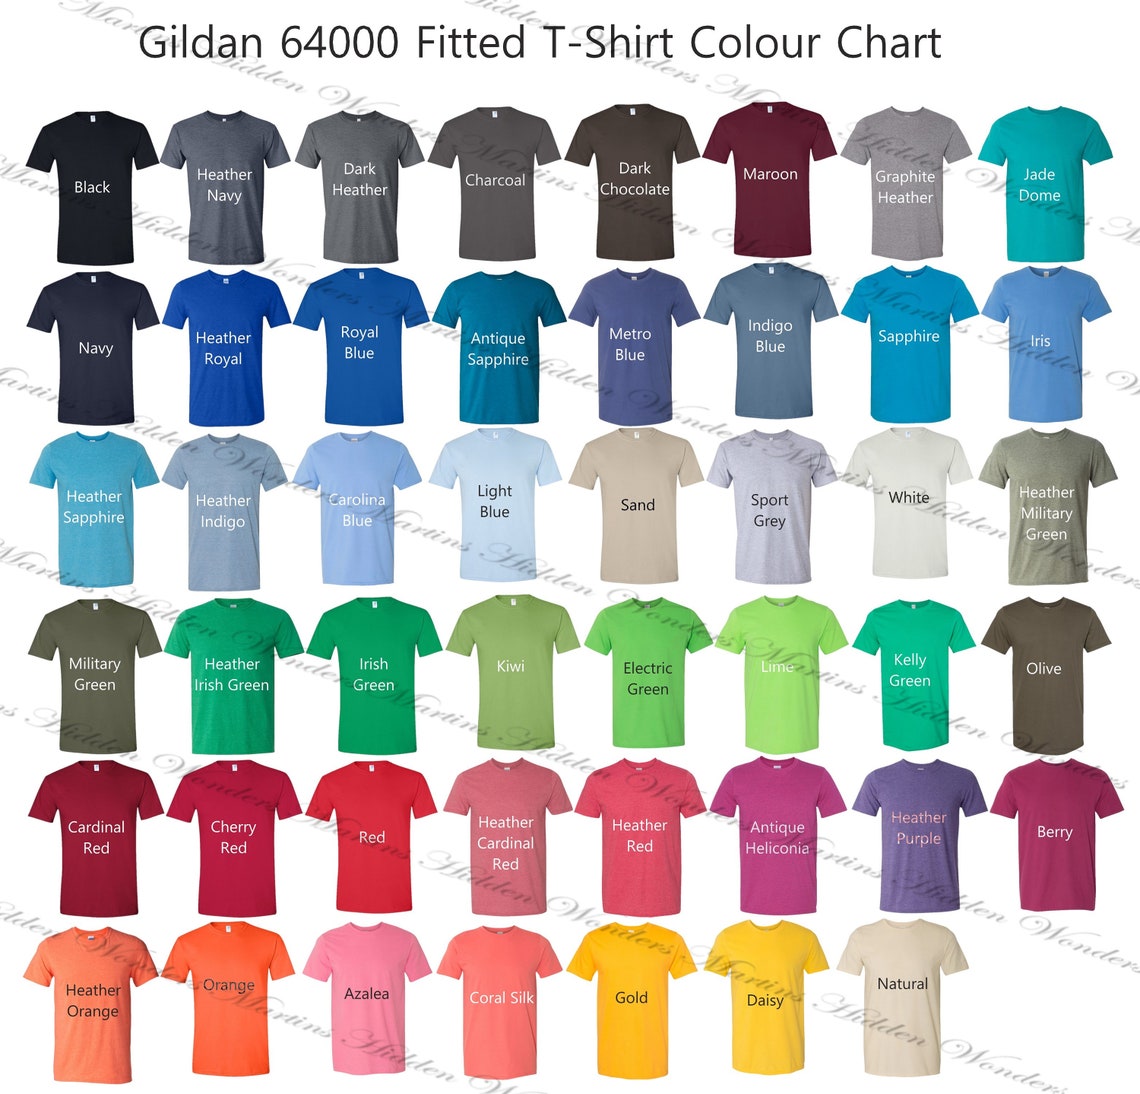 Gildan 64000 Fitted Men's T-shirt Adult Color Chart/size - Etsy